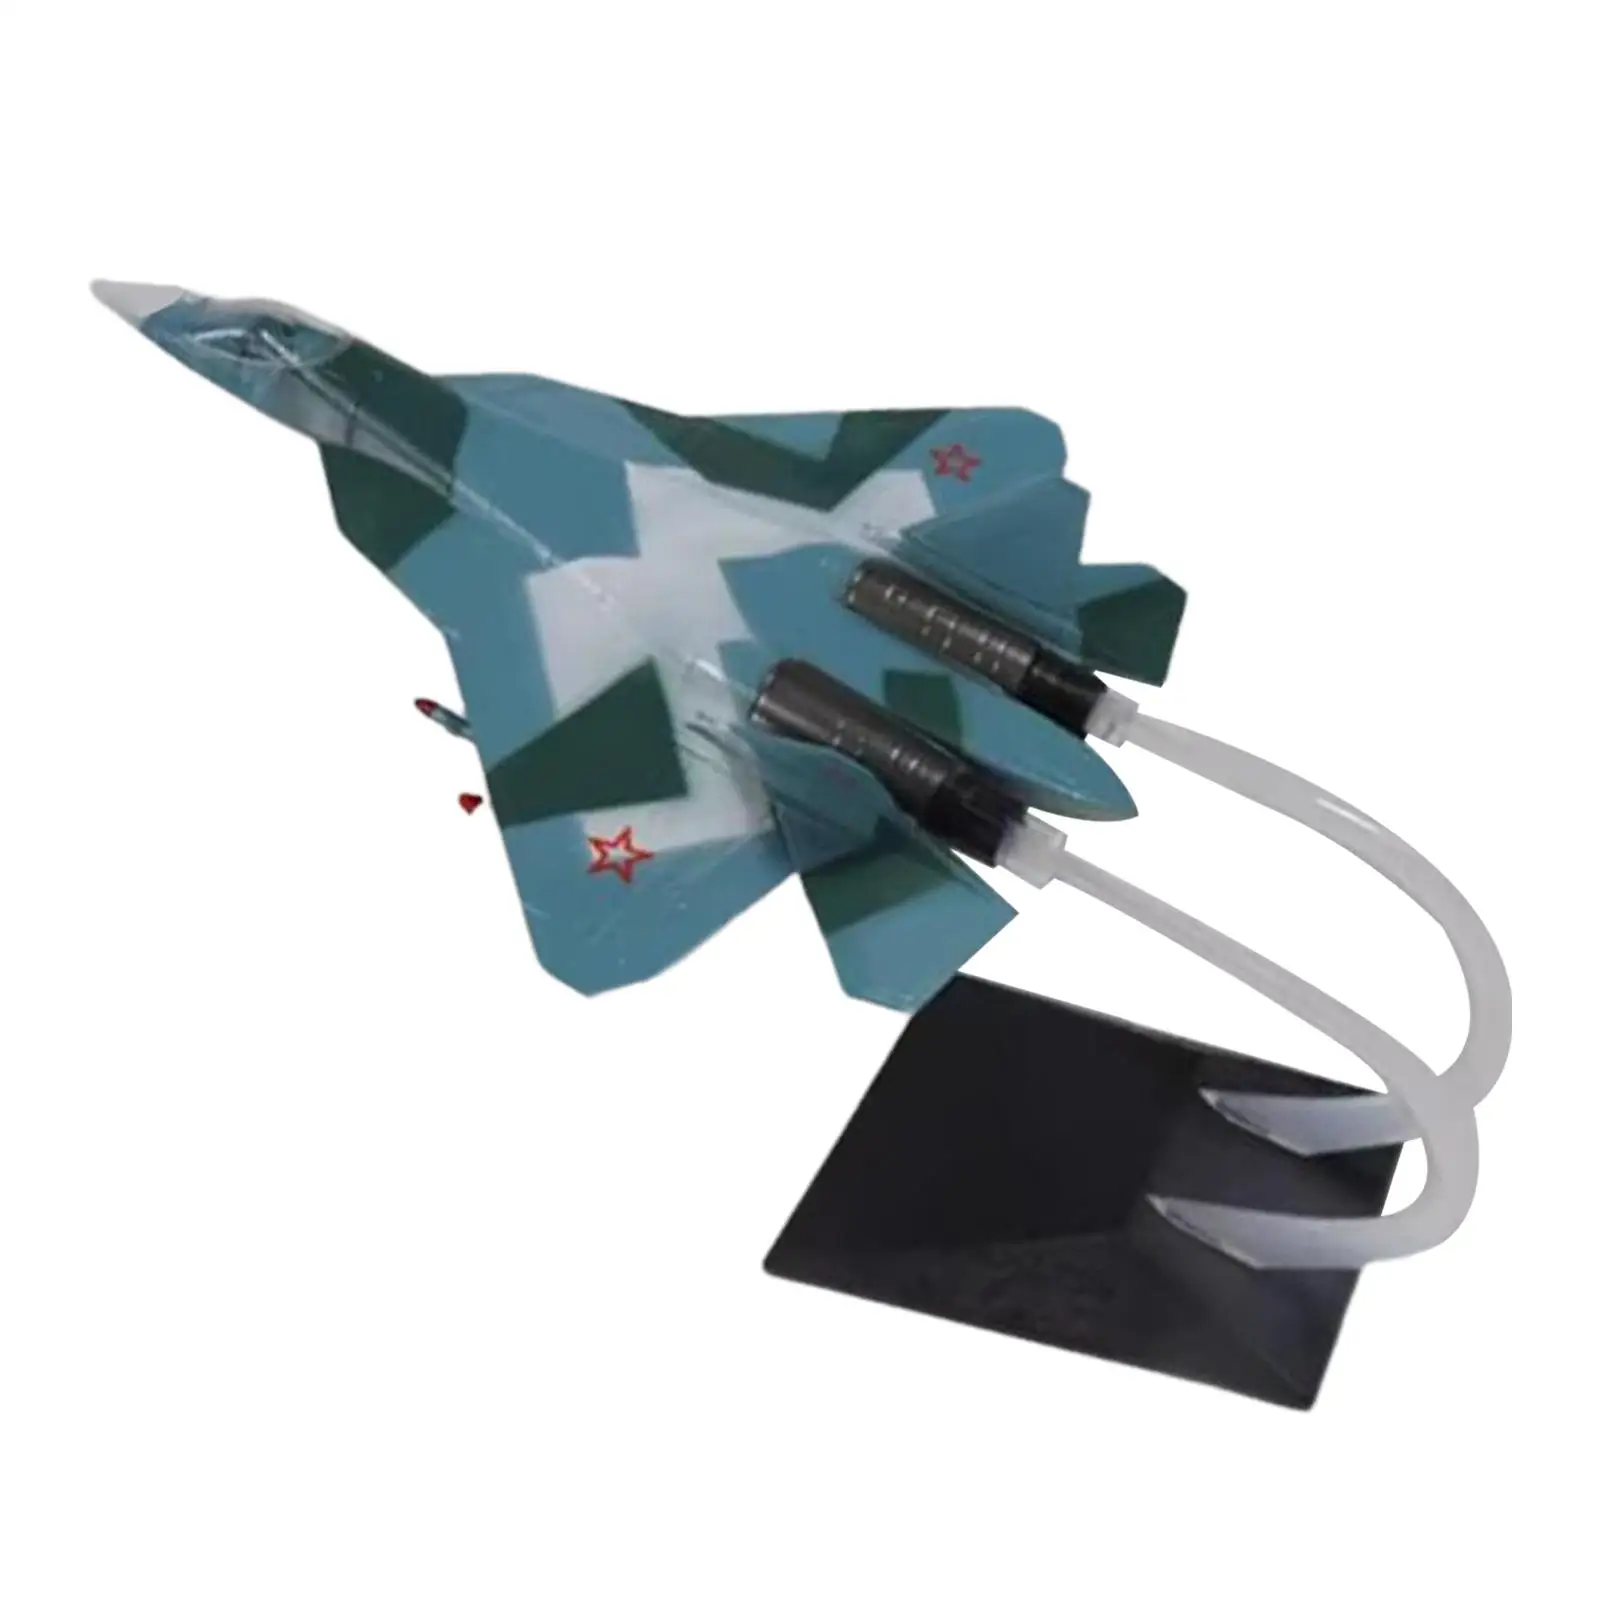 

1/72 Scale Aircraft Model T50 Fighter with Display Stand Detachable Simulation Plane for Decor Desktop Office Holiday Gifts Home